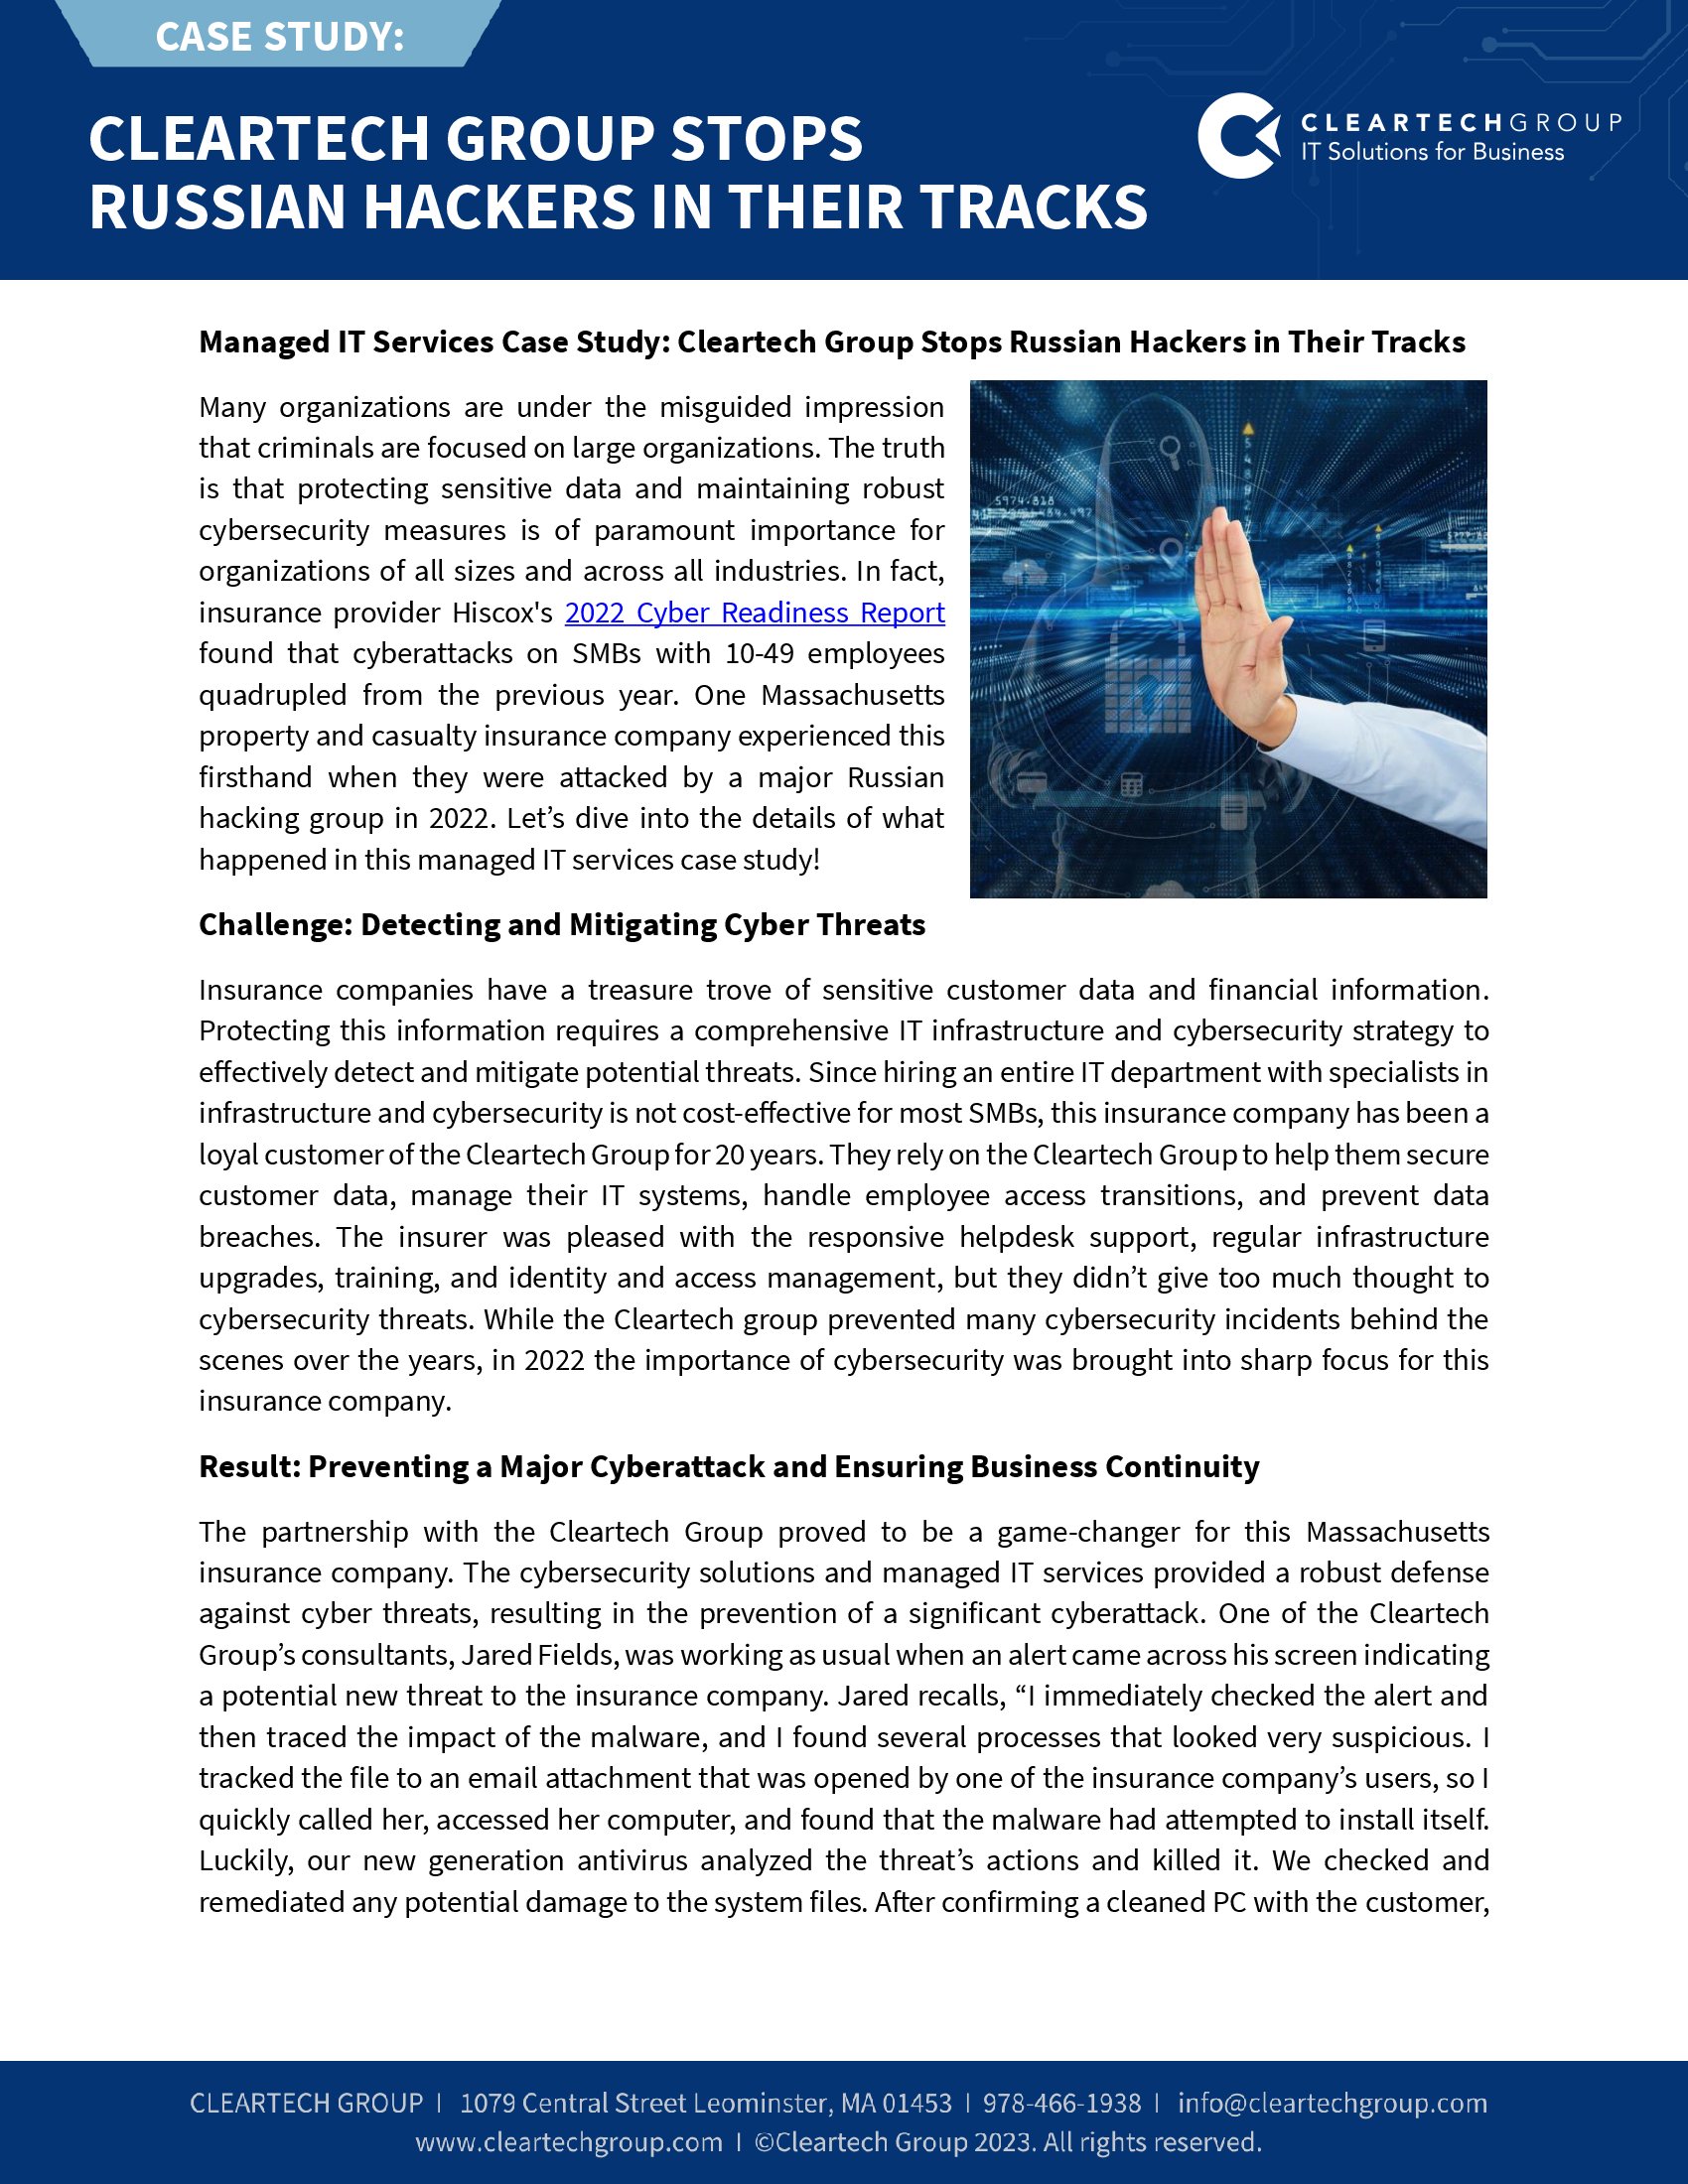 Managed IT services case study